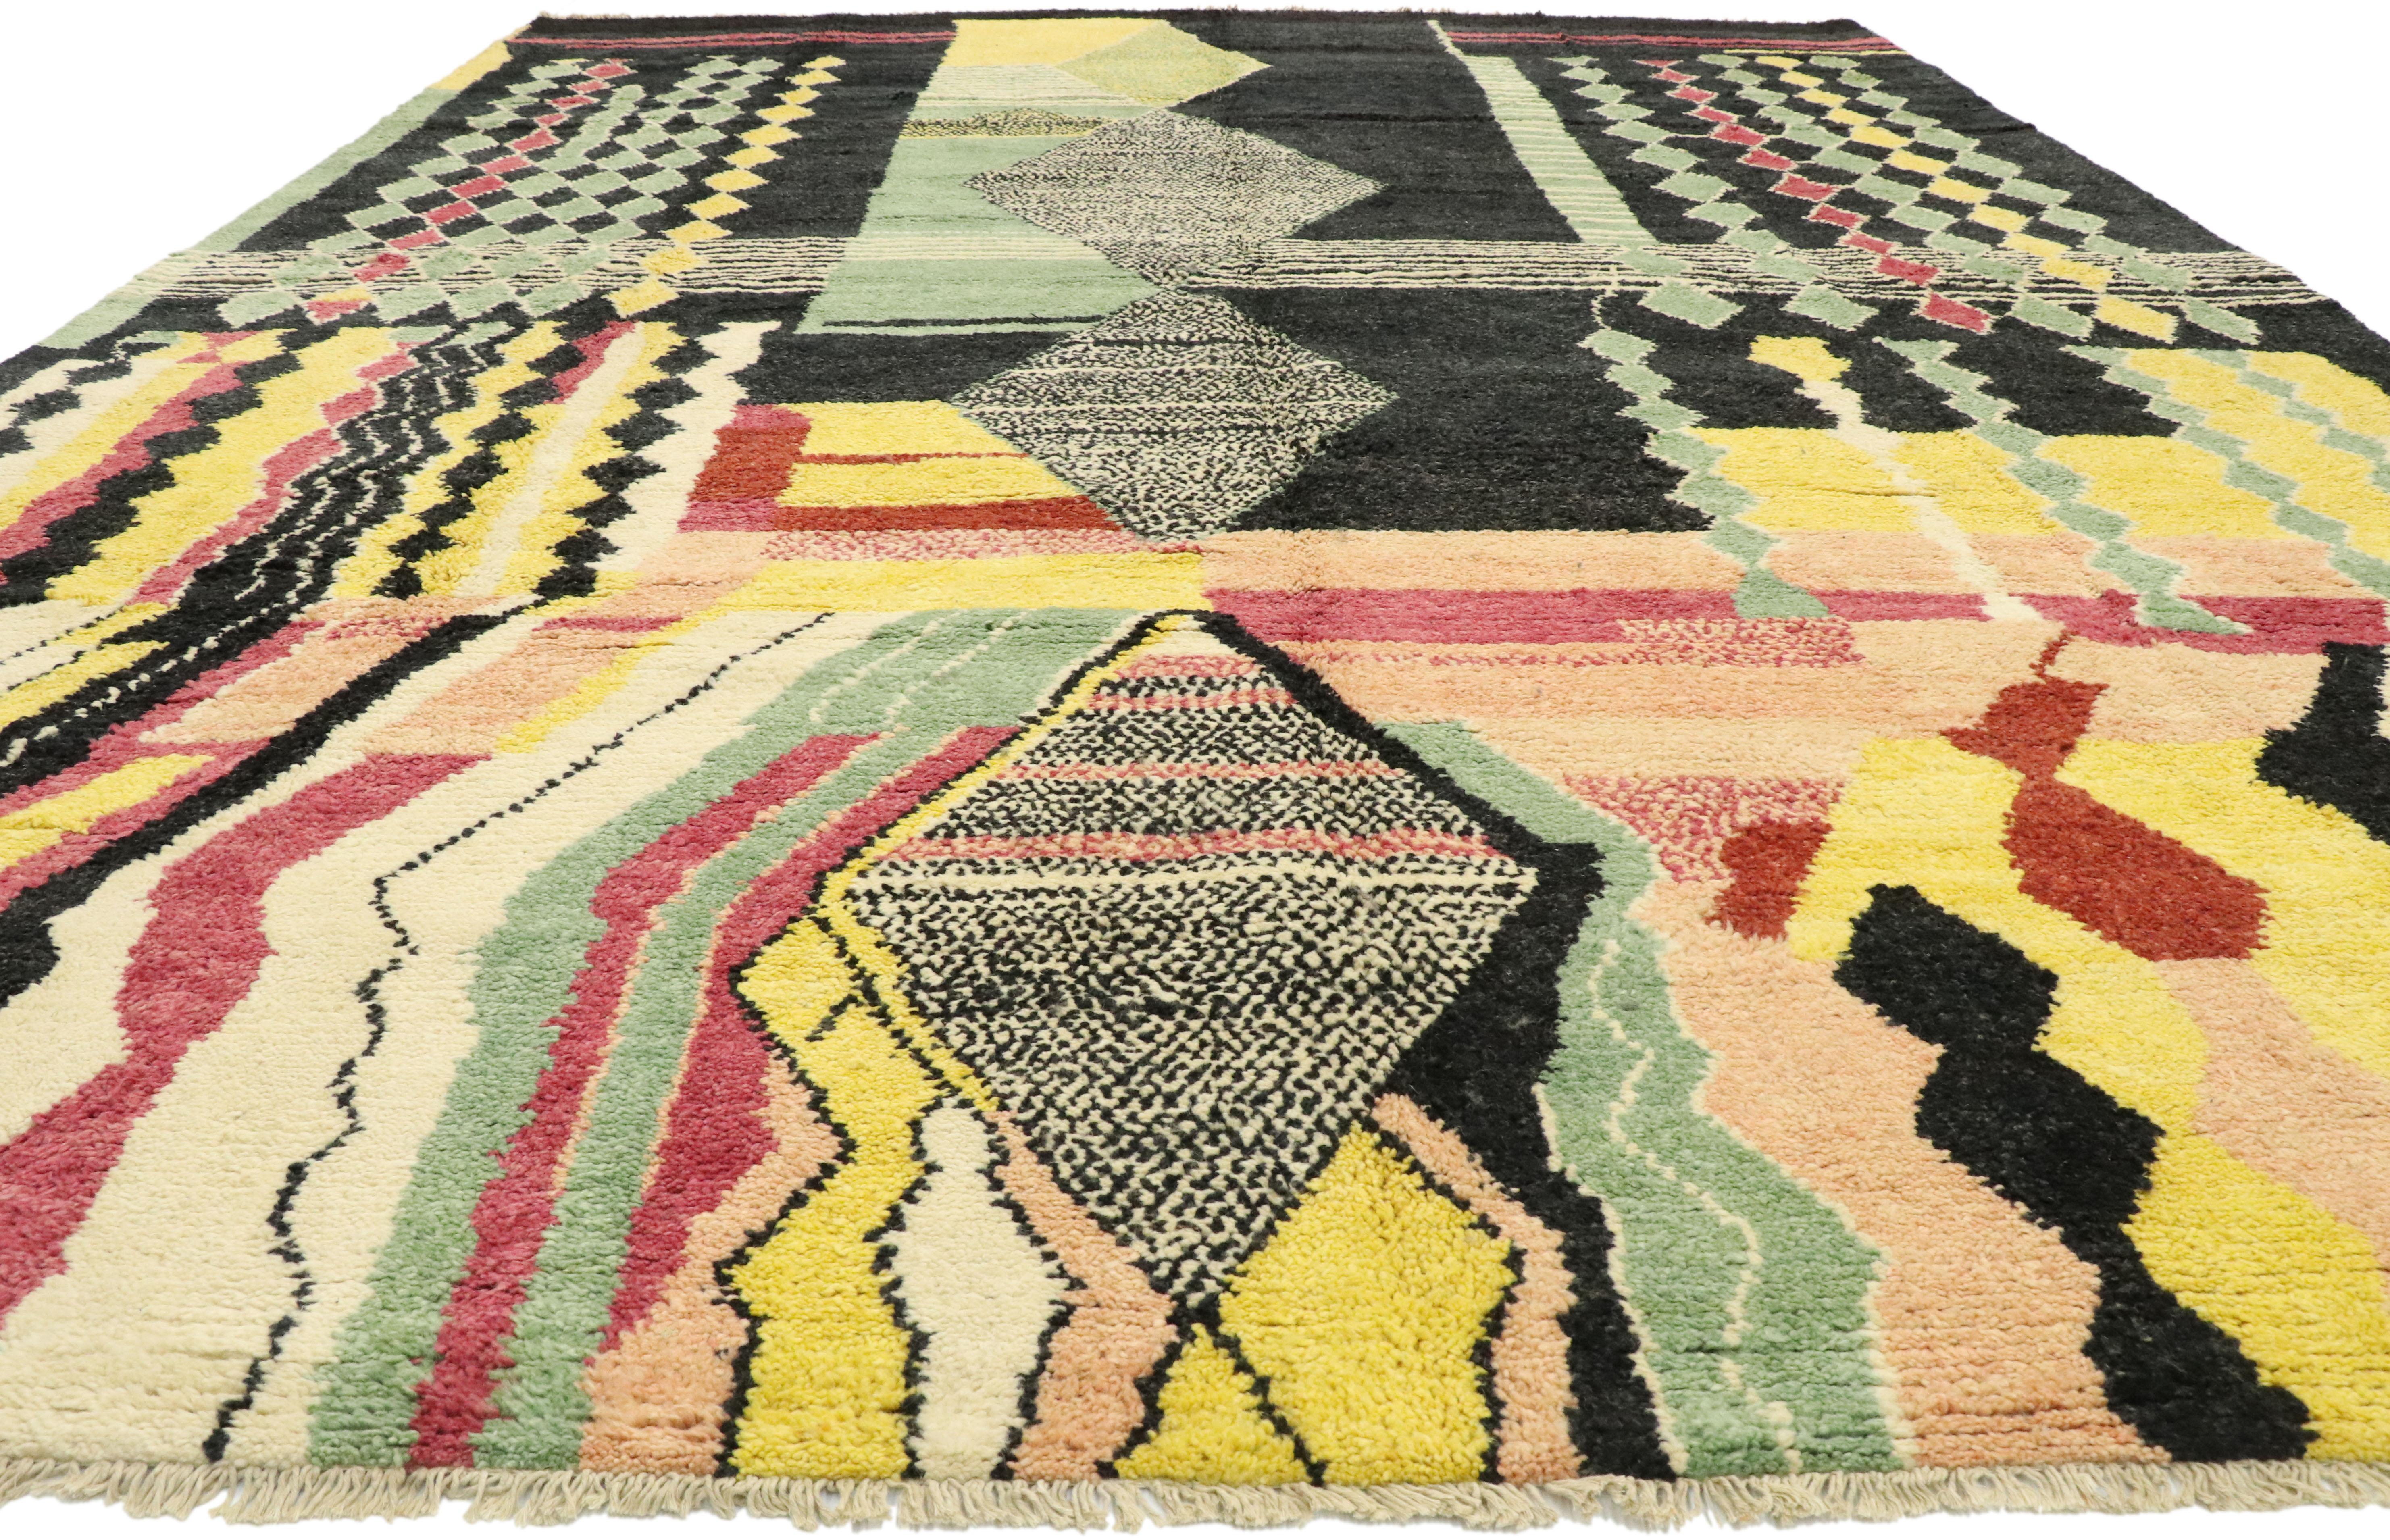 Pakistani New Contemporary Moroccan Area Rug with Postmodern Abstract Expressionist Style For Sale